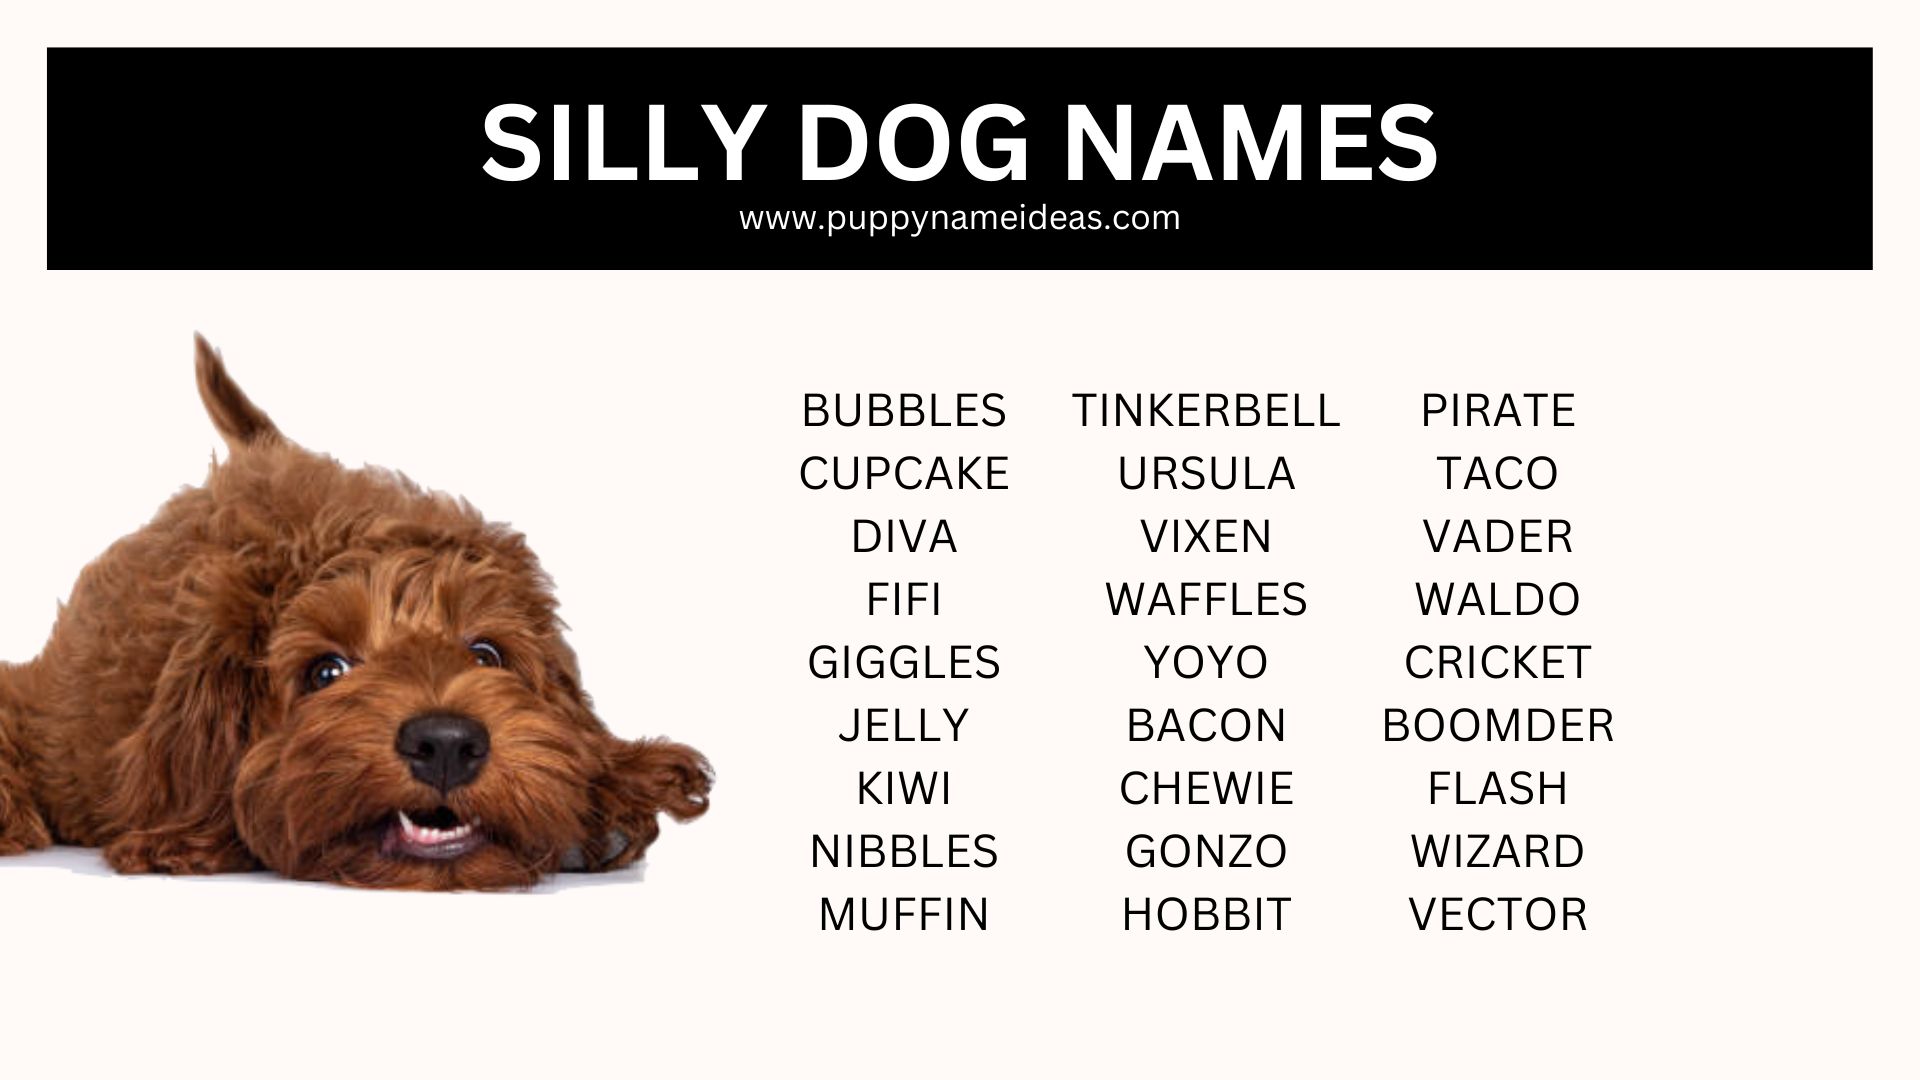 100+ Silly Dog Names